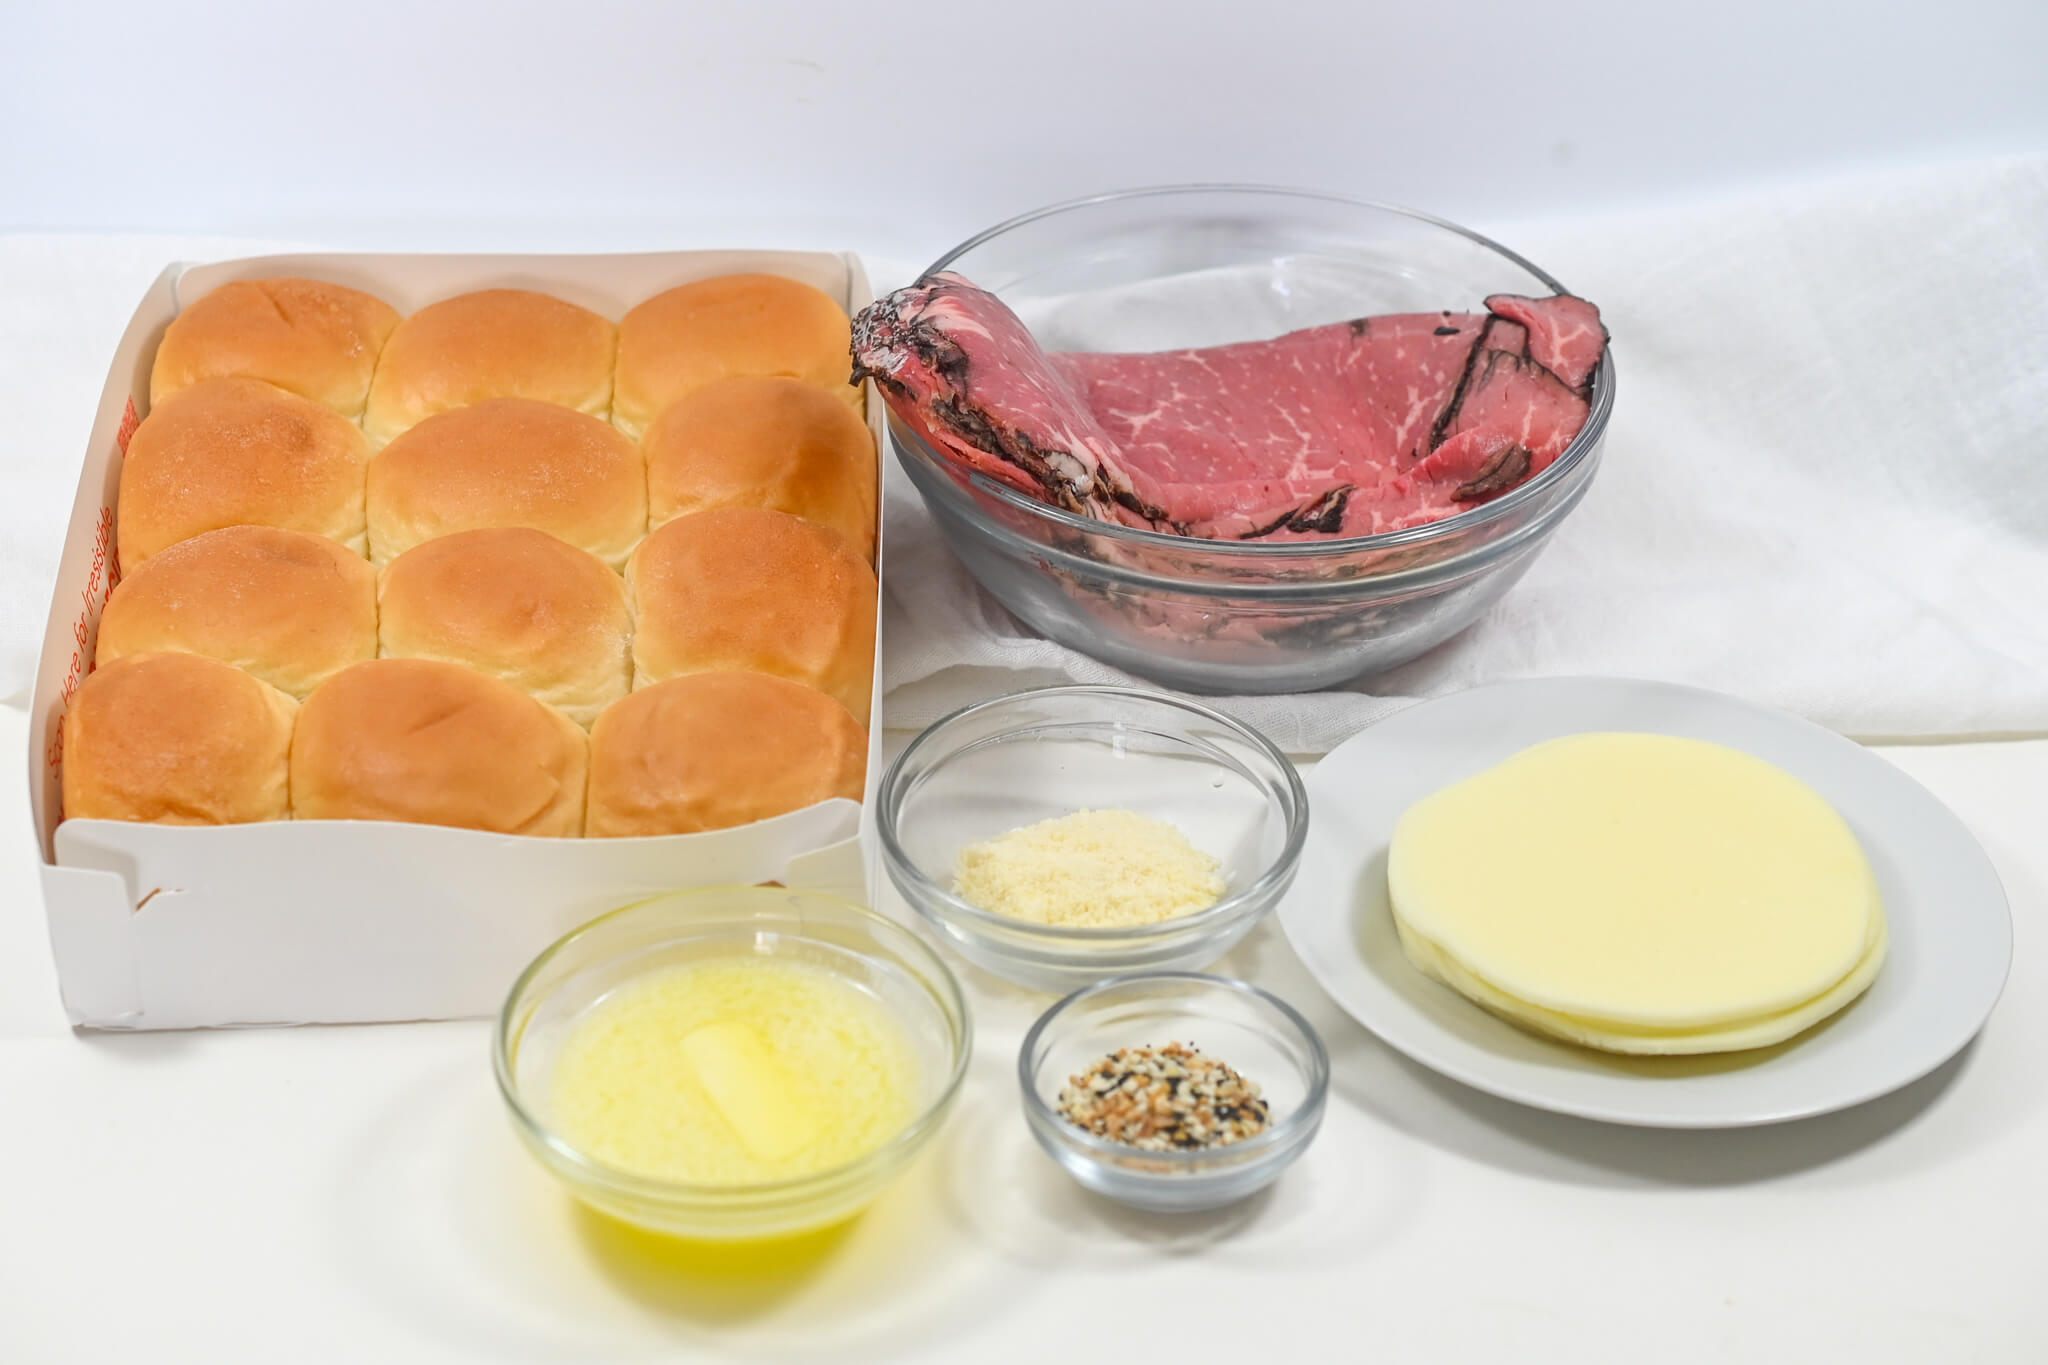 A table with roast beef sliders and ingredients.